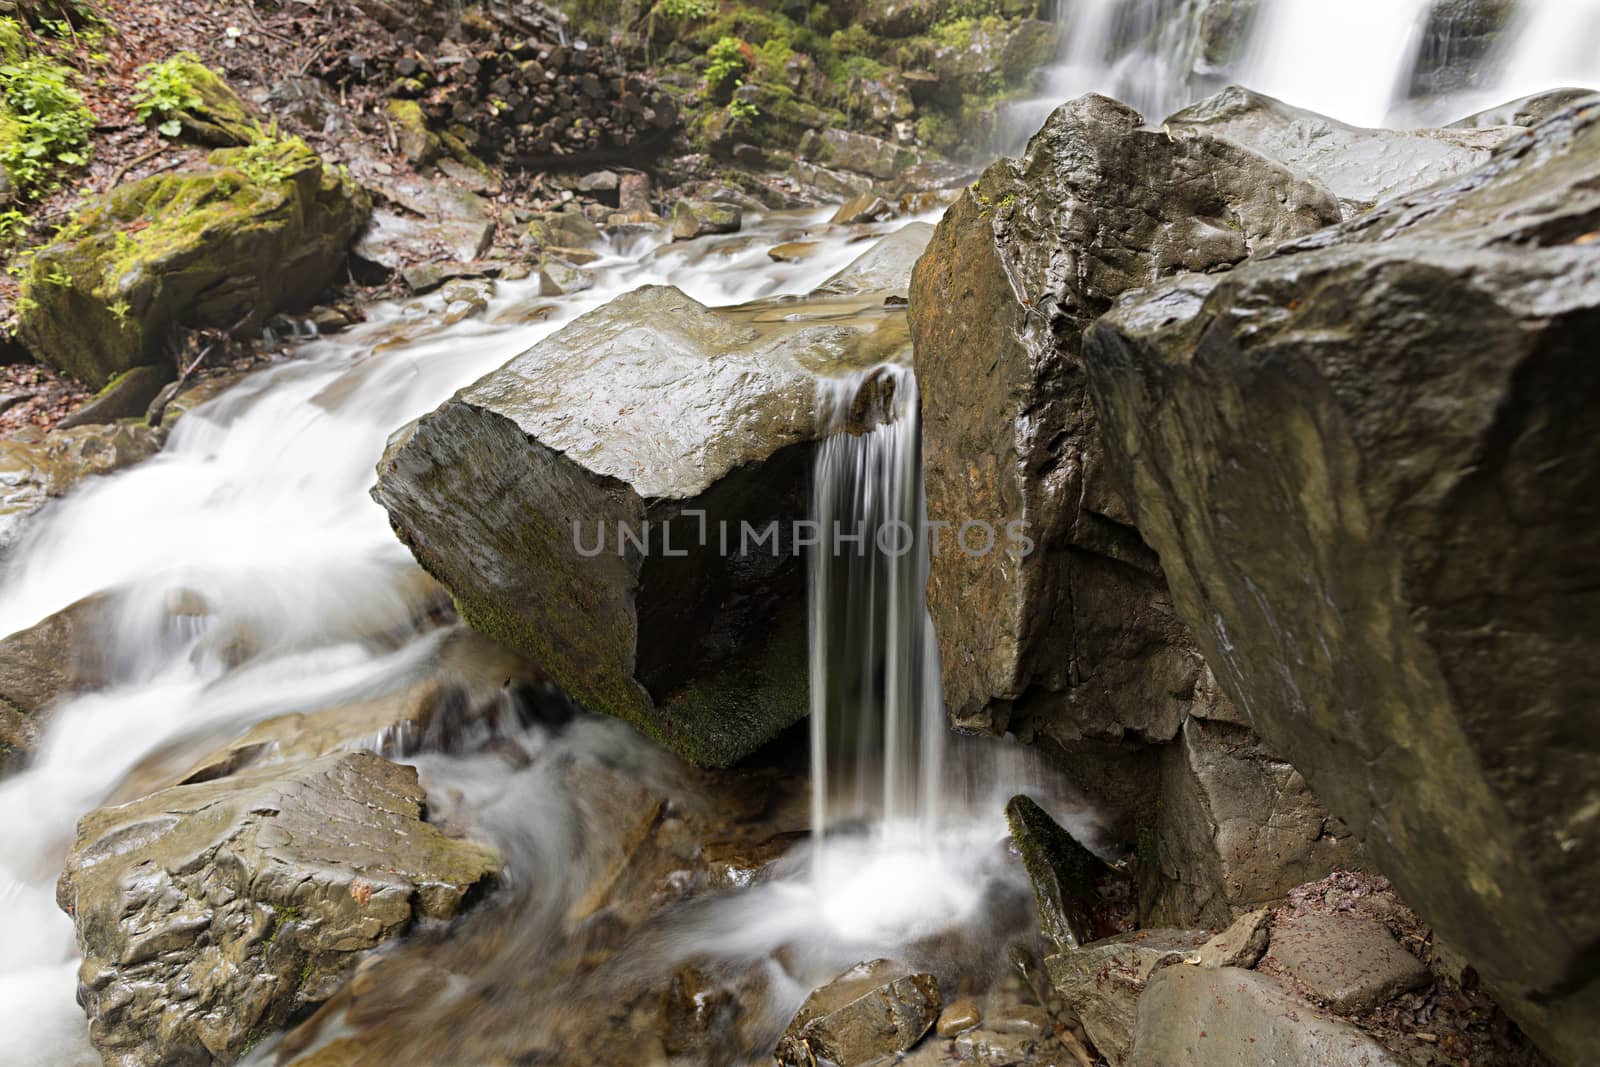 Large stones boulders washed by water in the mountain stream of the river, close-up